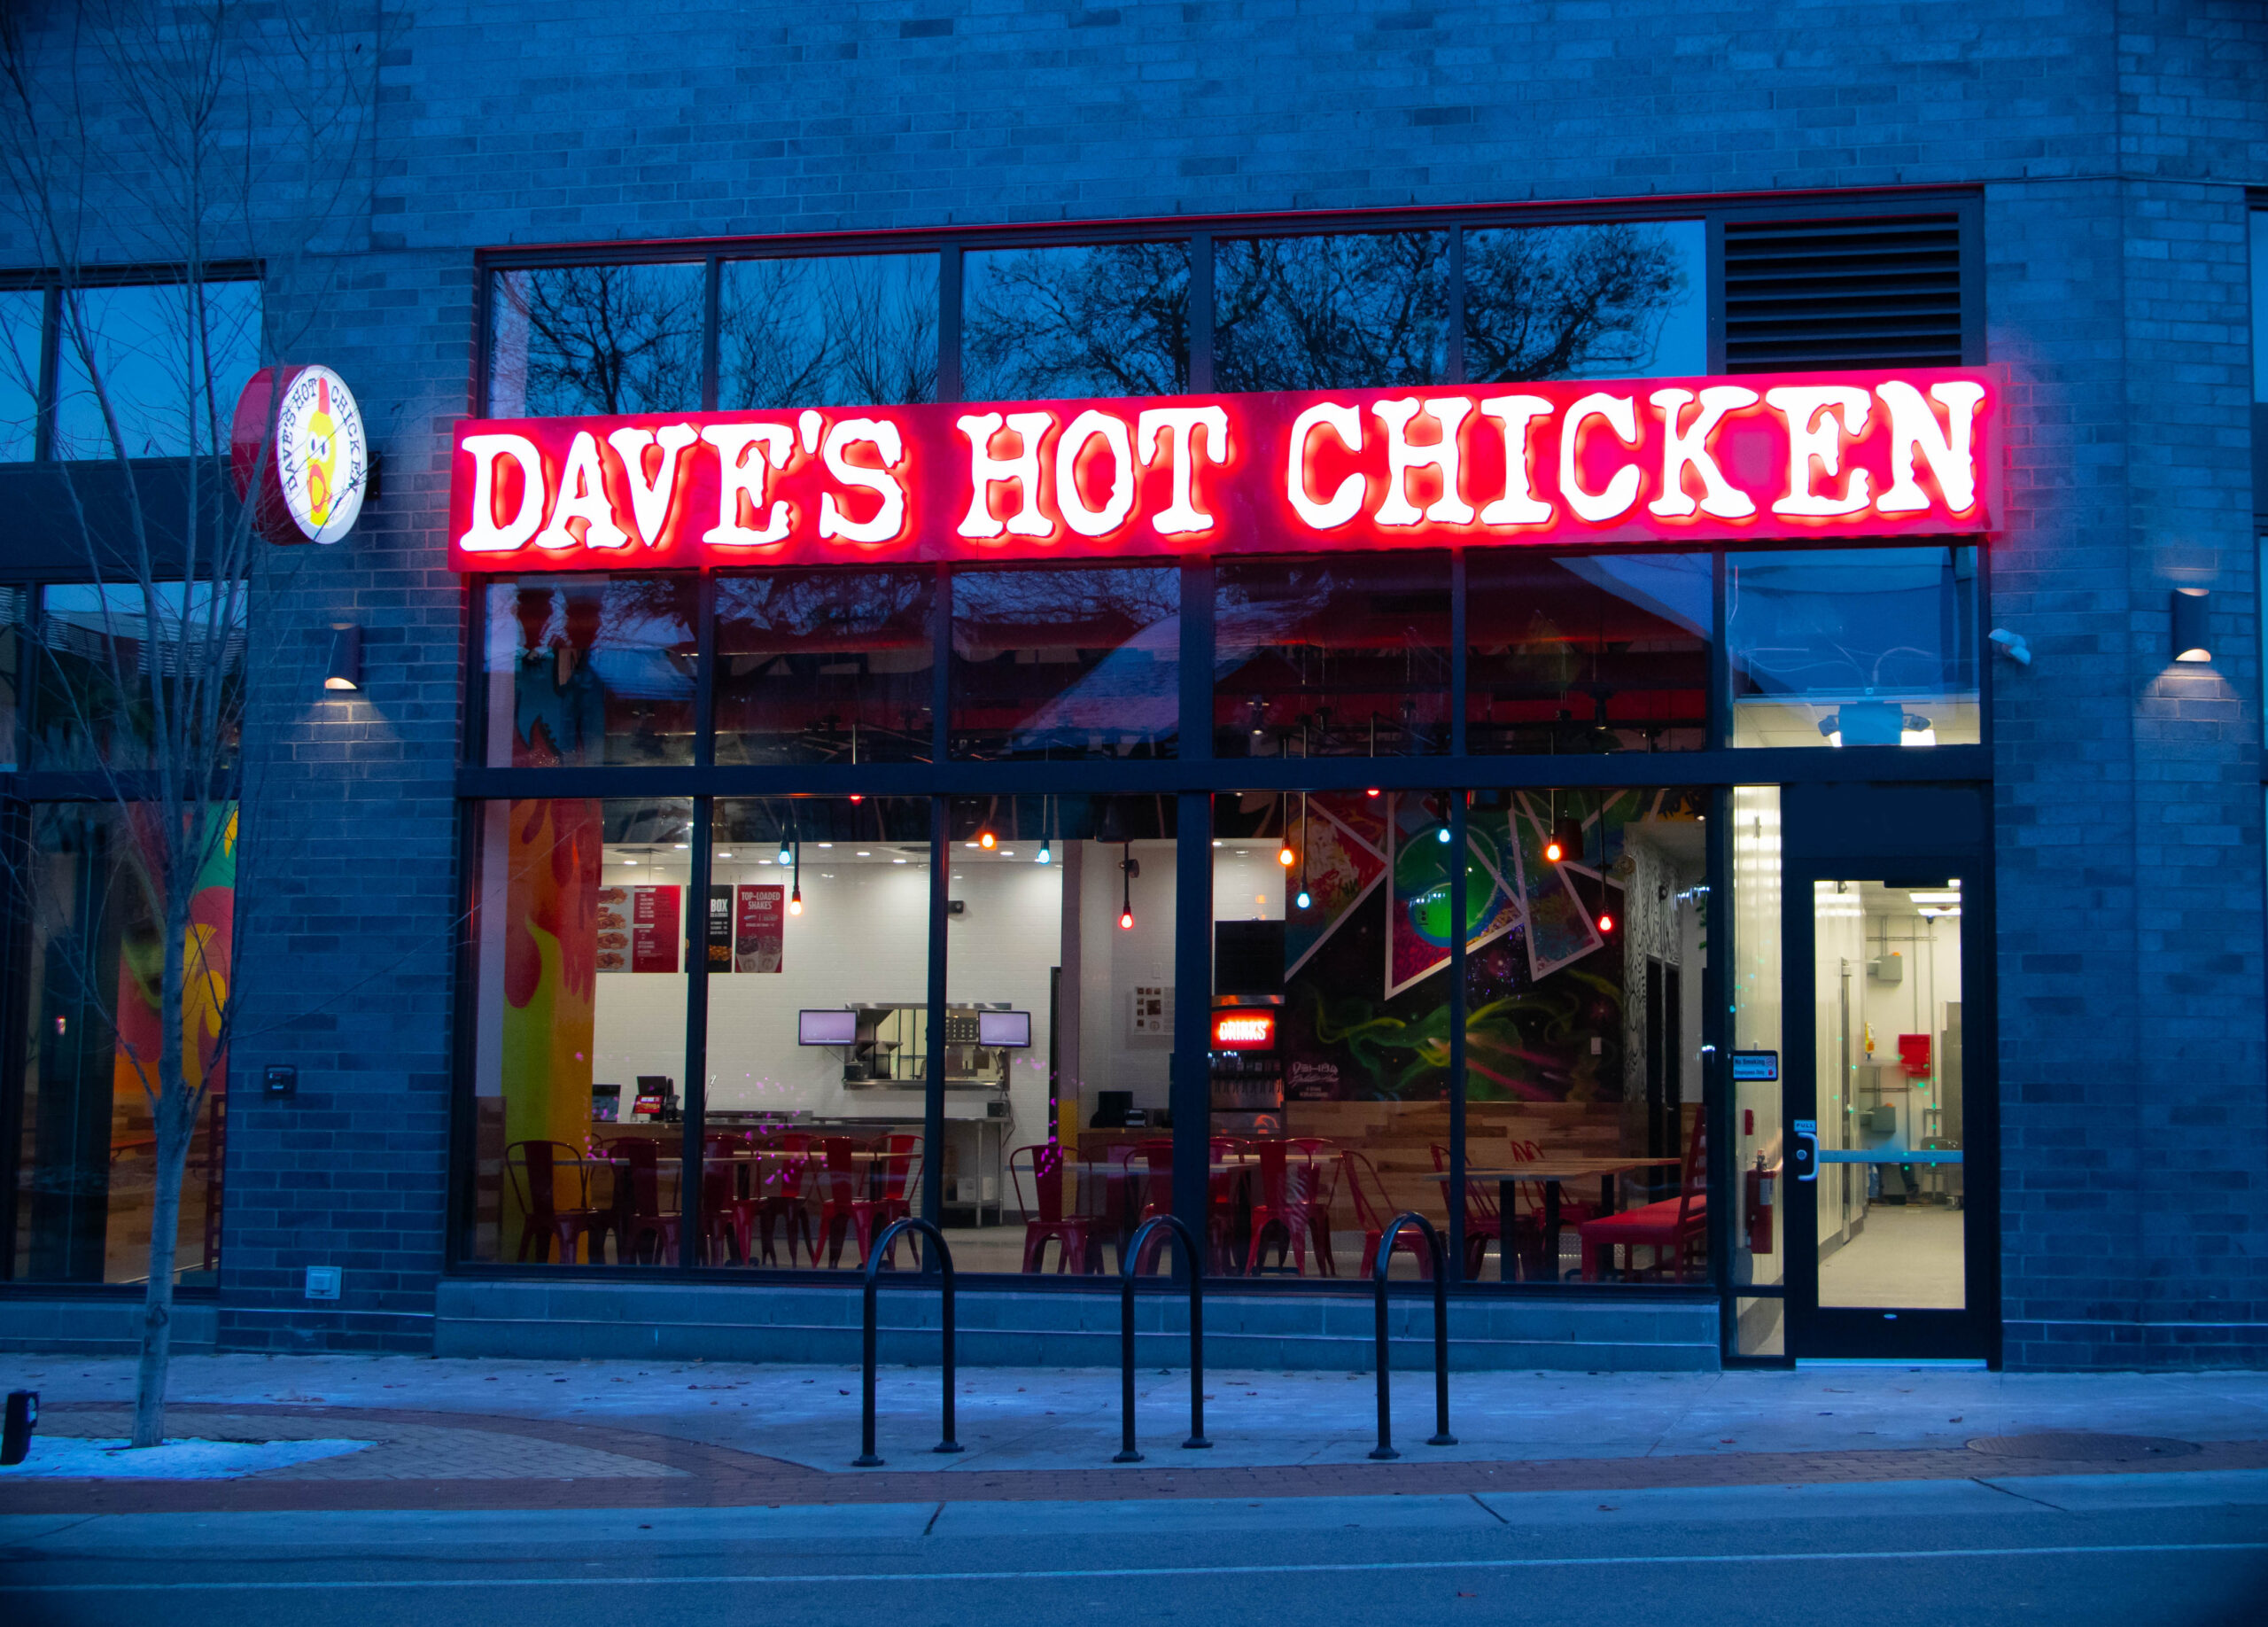 Exterior shot of the Dave's Hot Chicken signage lit up in neon lights in East Lansing MI